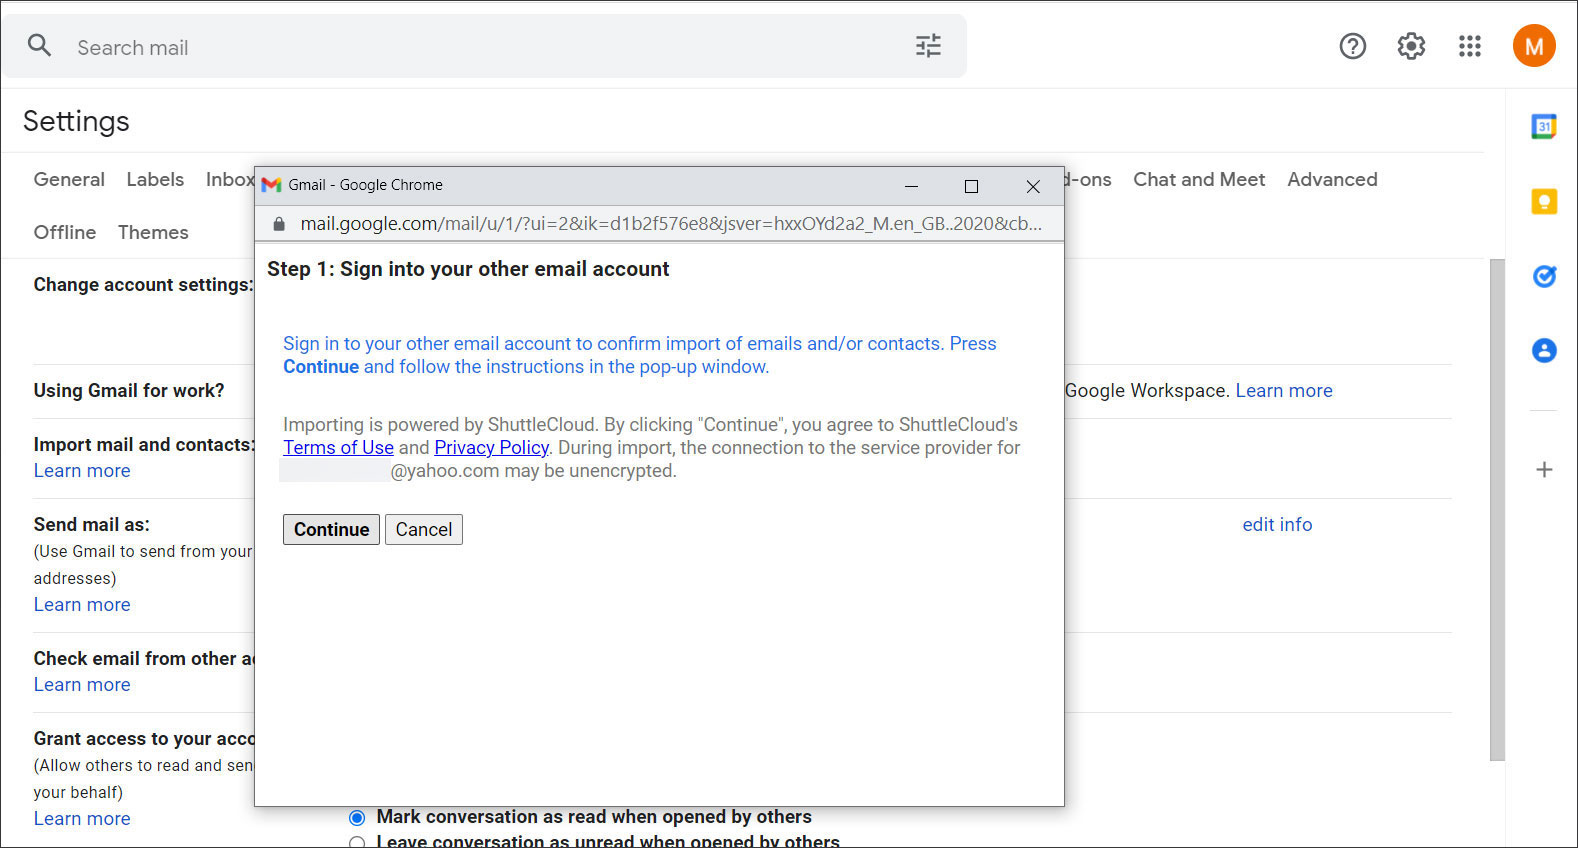 Press Continue to import mail from Yahoo to Gmail